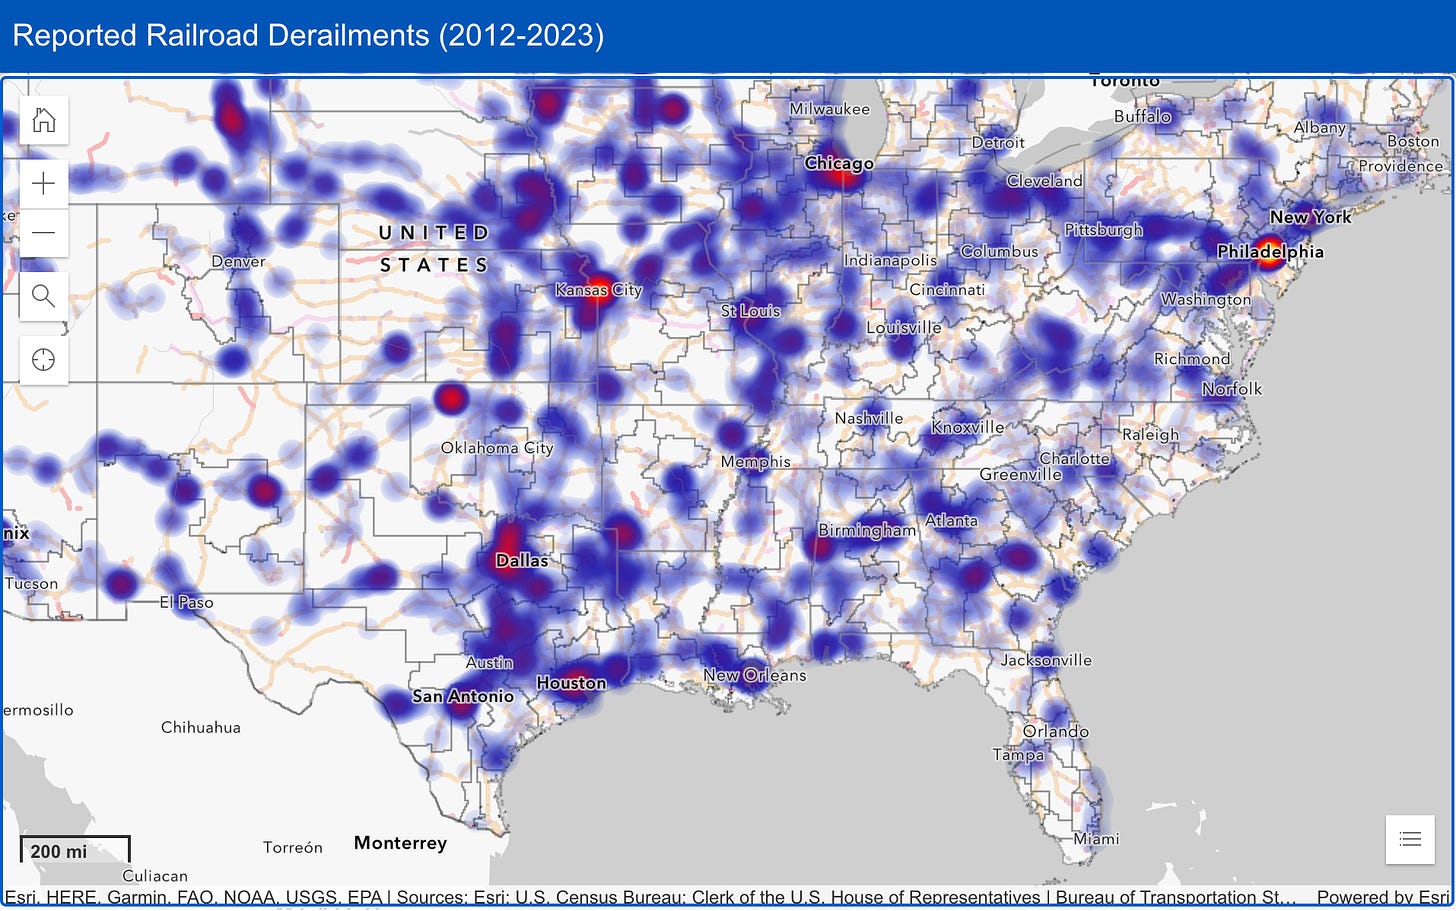 Map of Reported Railroad Derailments 2012-2023 (National League of Cities)